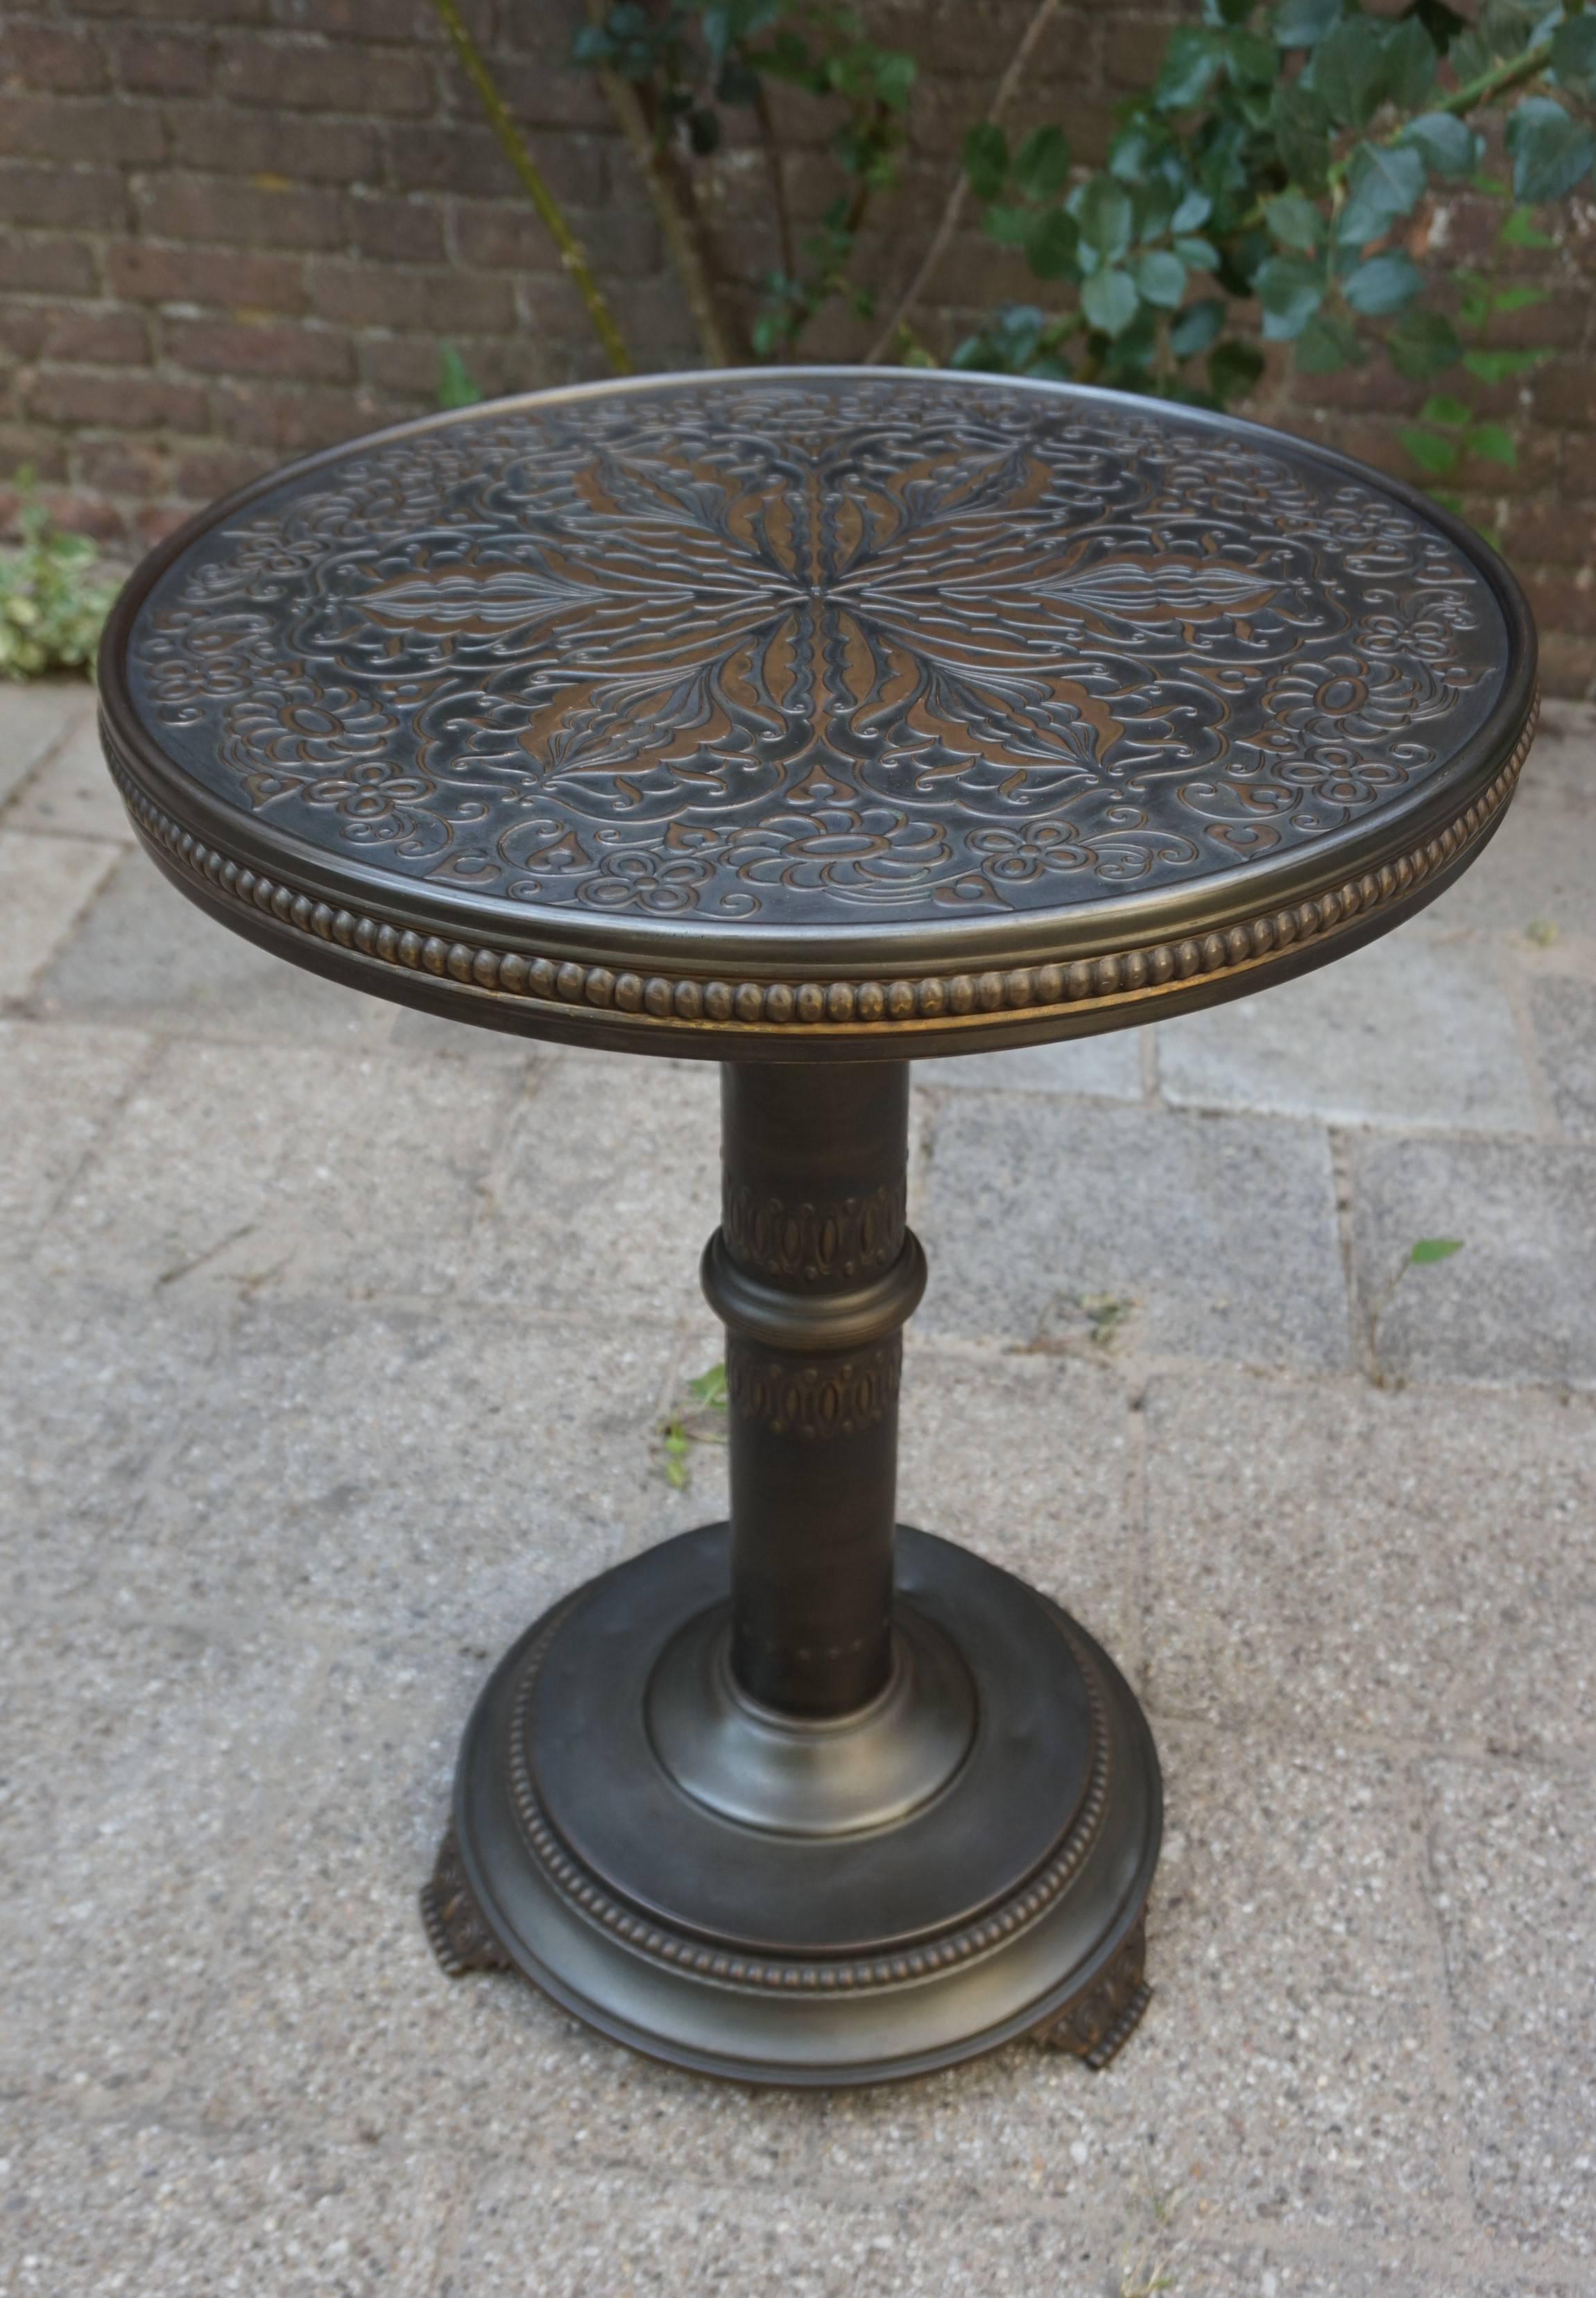 Antique and Unique Arts & Crafts Embossed Brass Table with Stylized Owl Feet 11